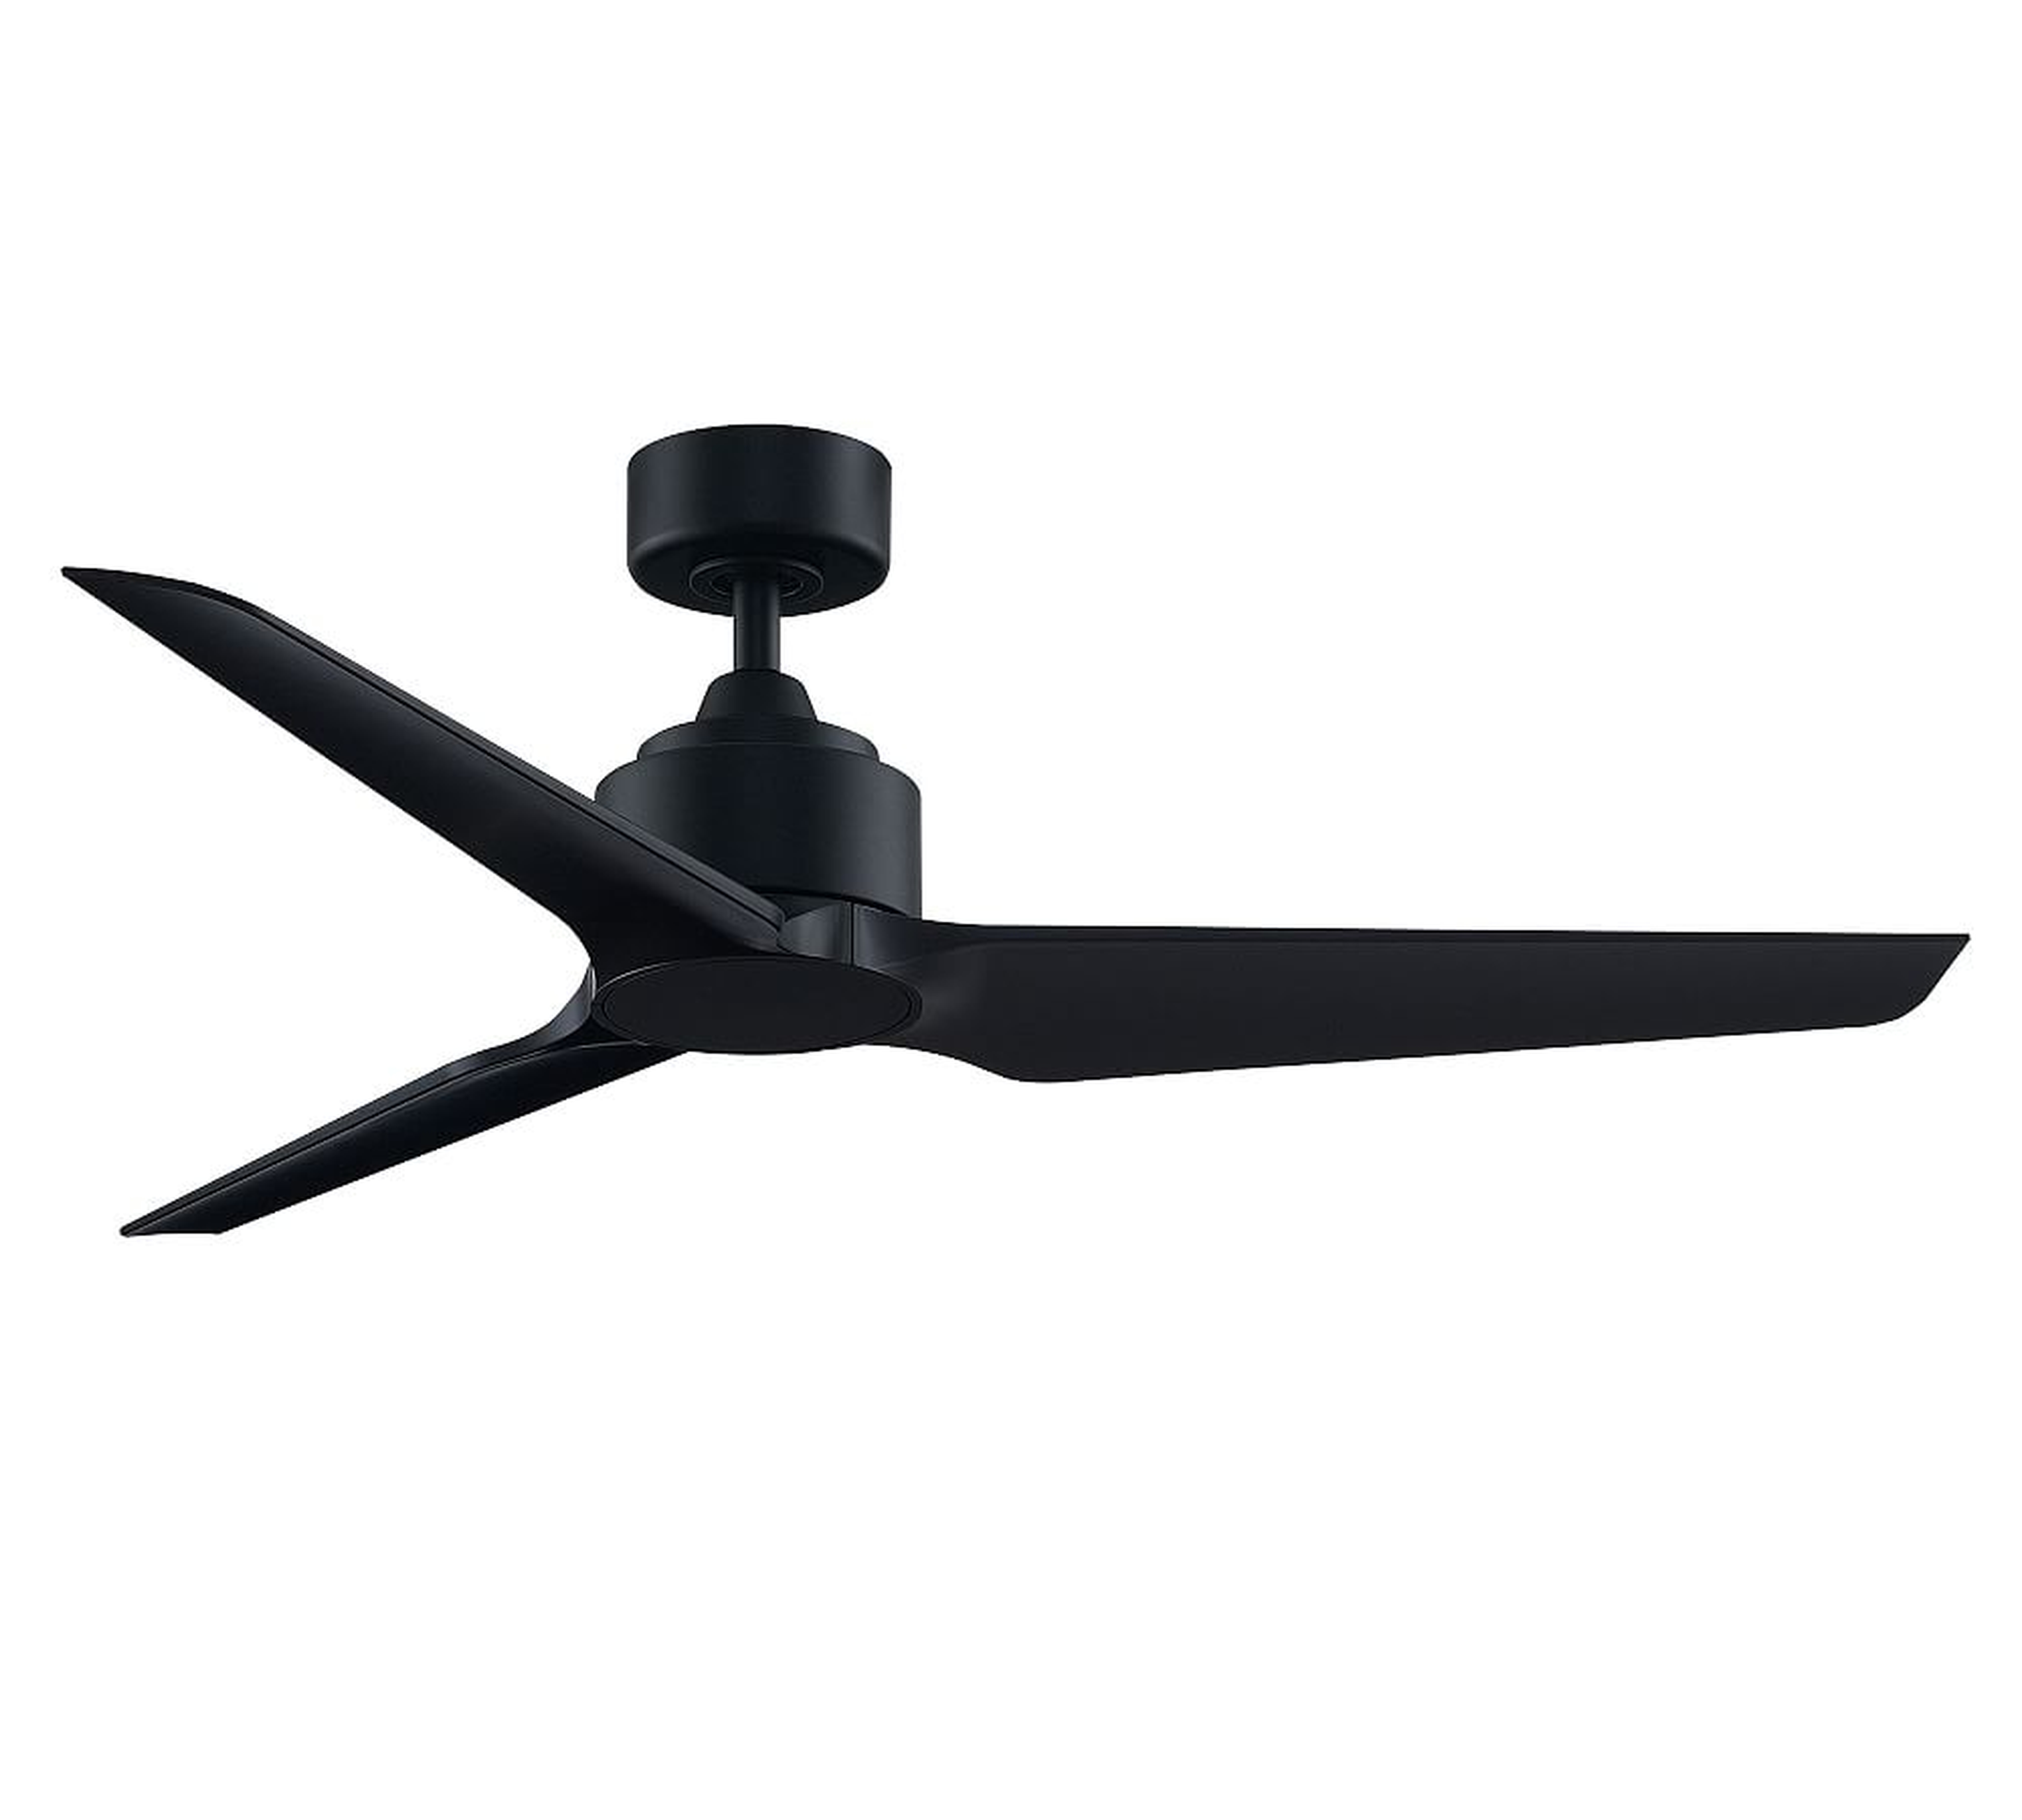 Triaire 52" Indoor/Outdoor Ceiling Fan, Black With Black Blades - Pottery Barn